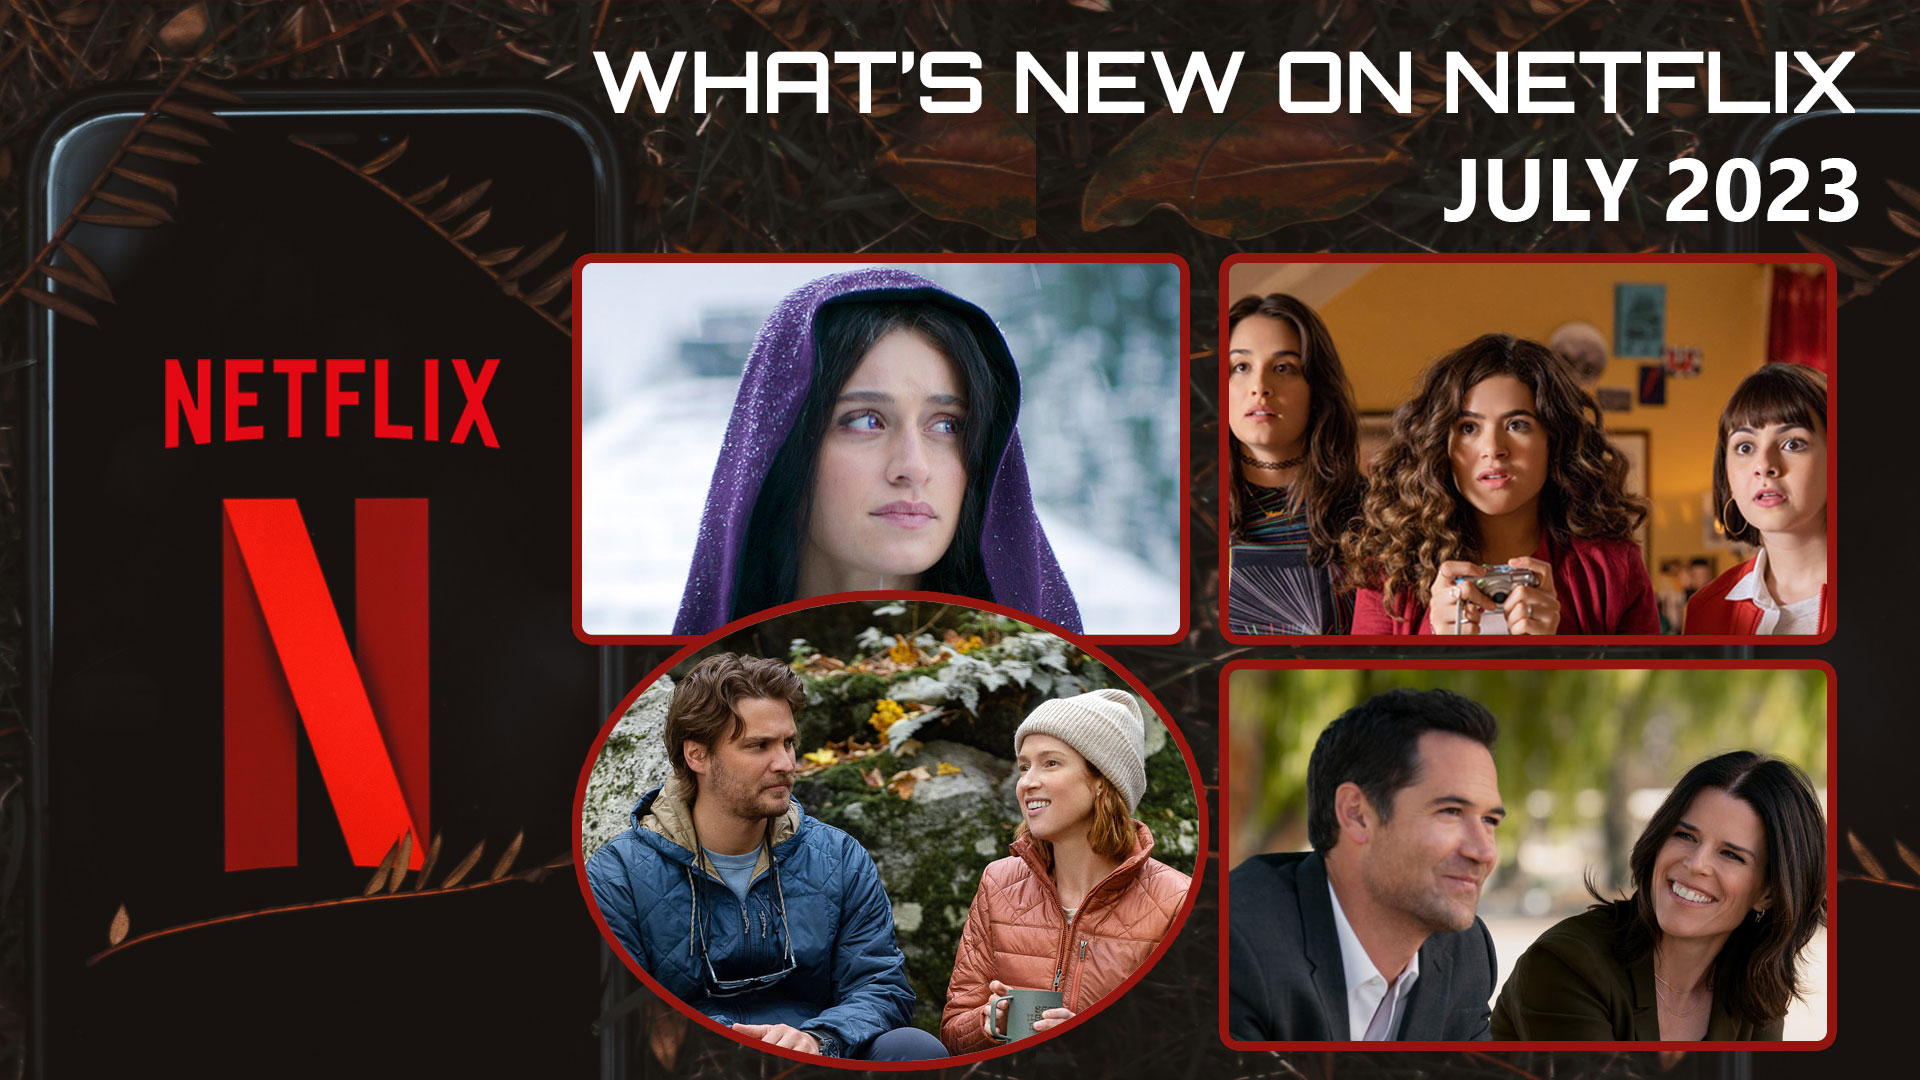 What's New on Netflix July 2023